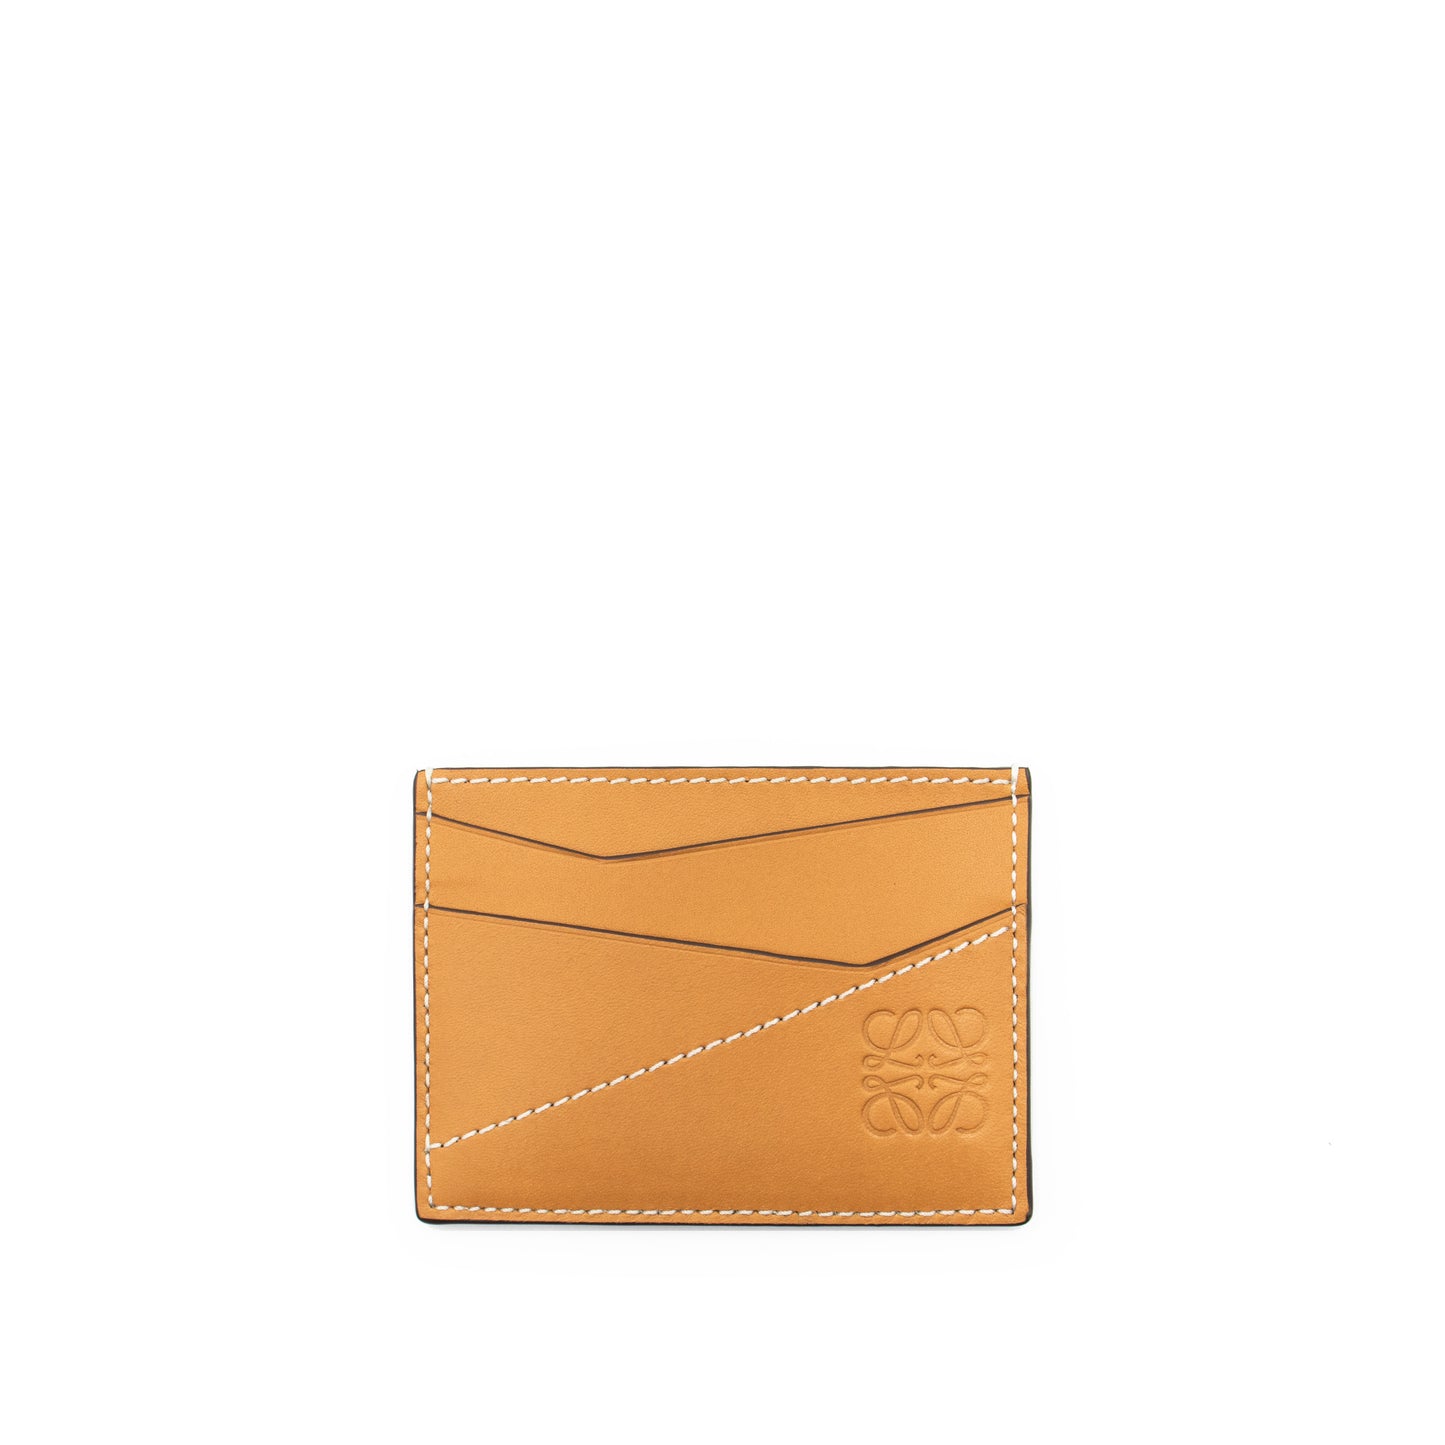 Puzzle Stitches Plain Cardholder in Smooth Calfskin in Light Caramel